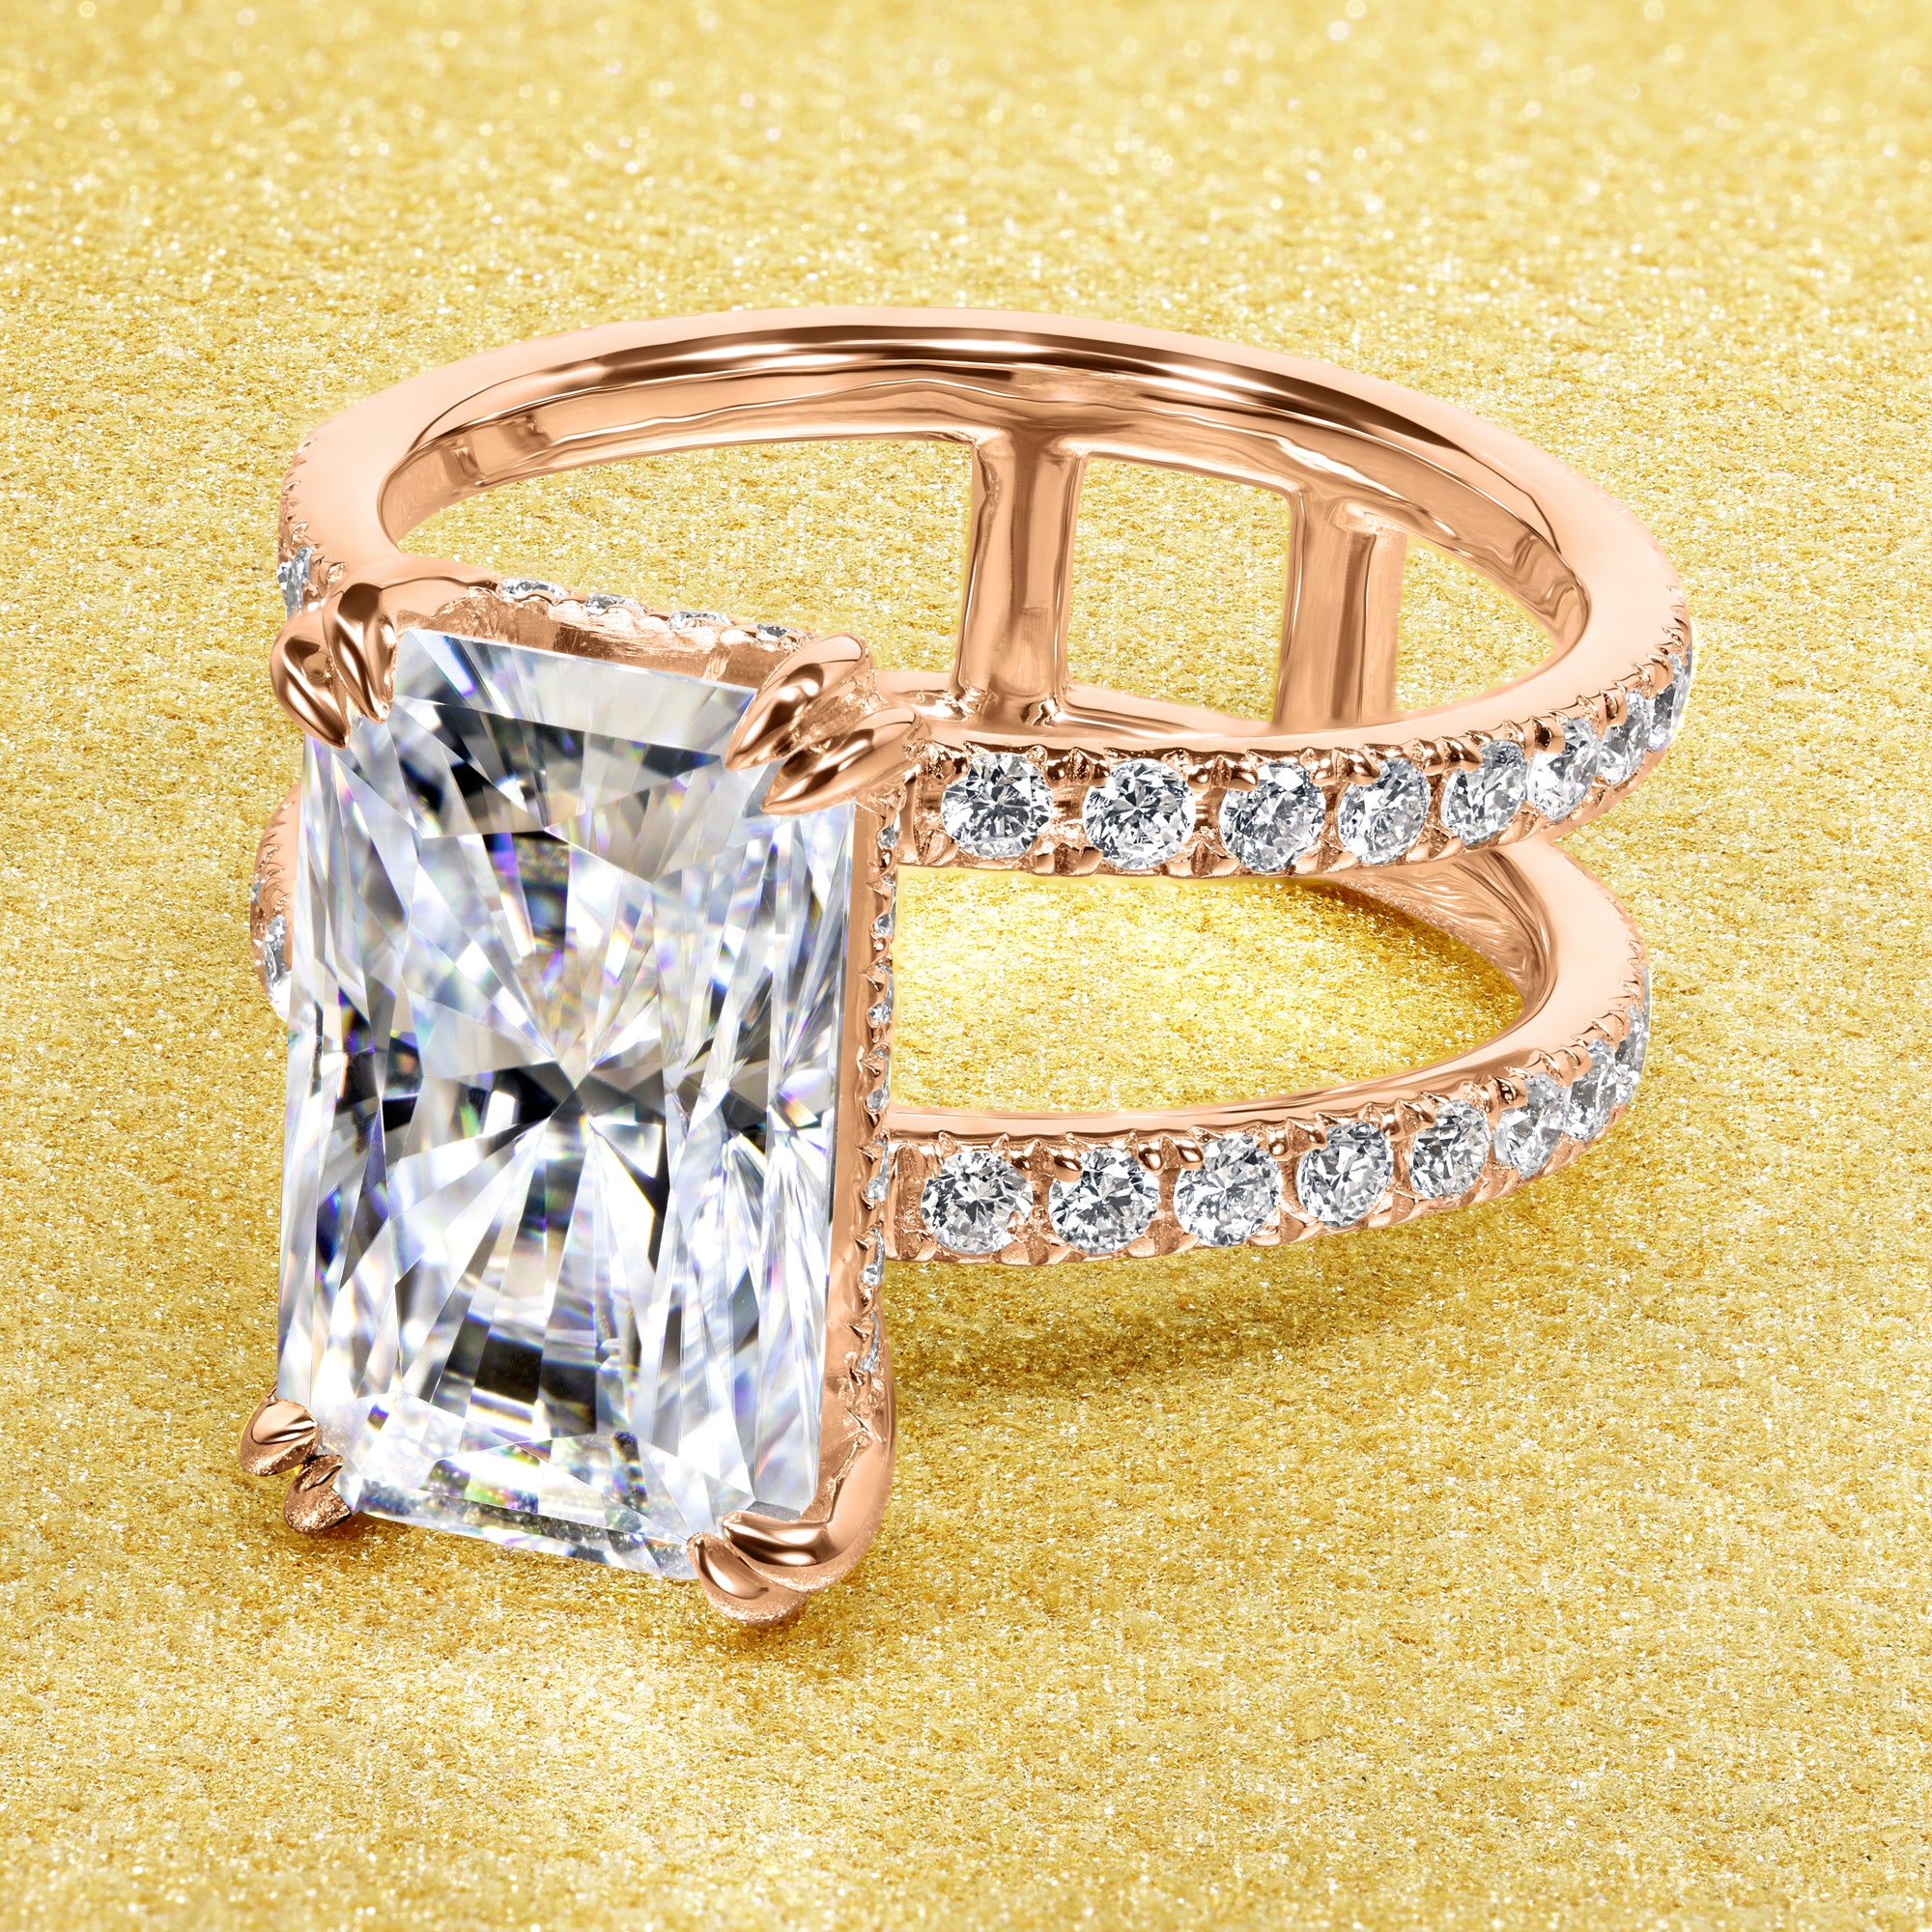 Alessandra 4.25ct Elongated Radiant Brilliant-cut Moissanite Double Band Hidden Halo Engagement ring in 14K Gold, 18K Gold, or Platinum handcrafted in Los Angeles by Earthena Jewelry.